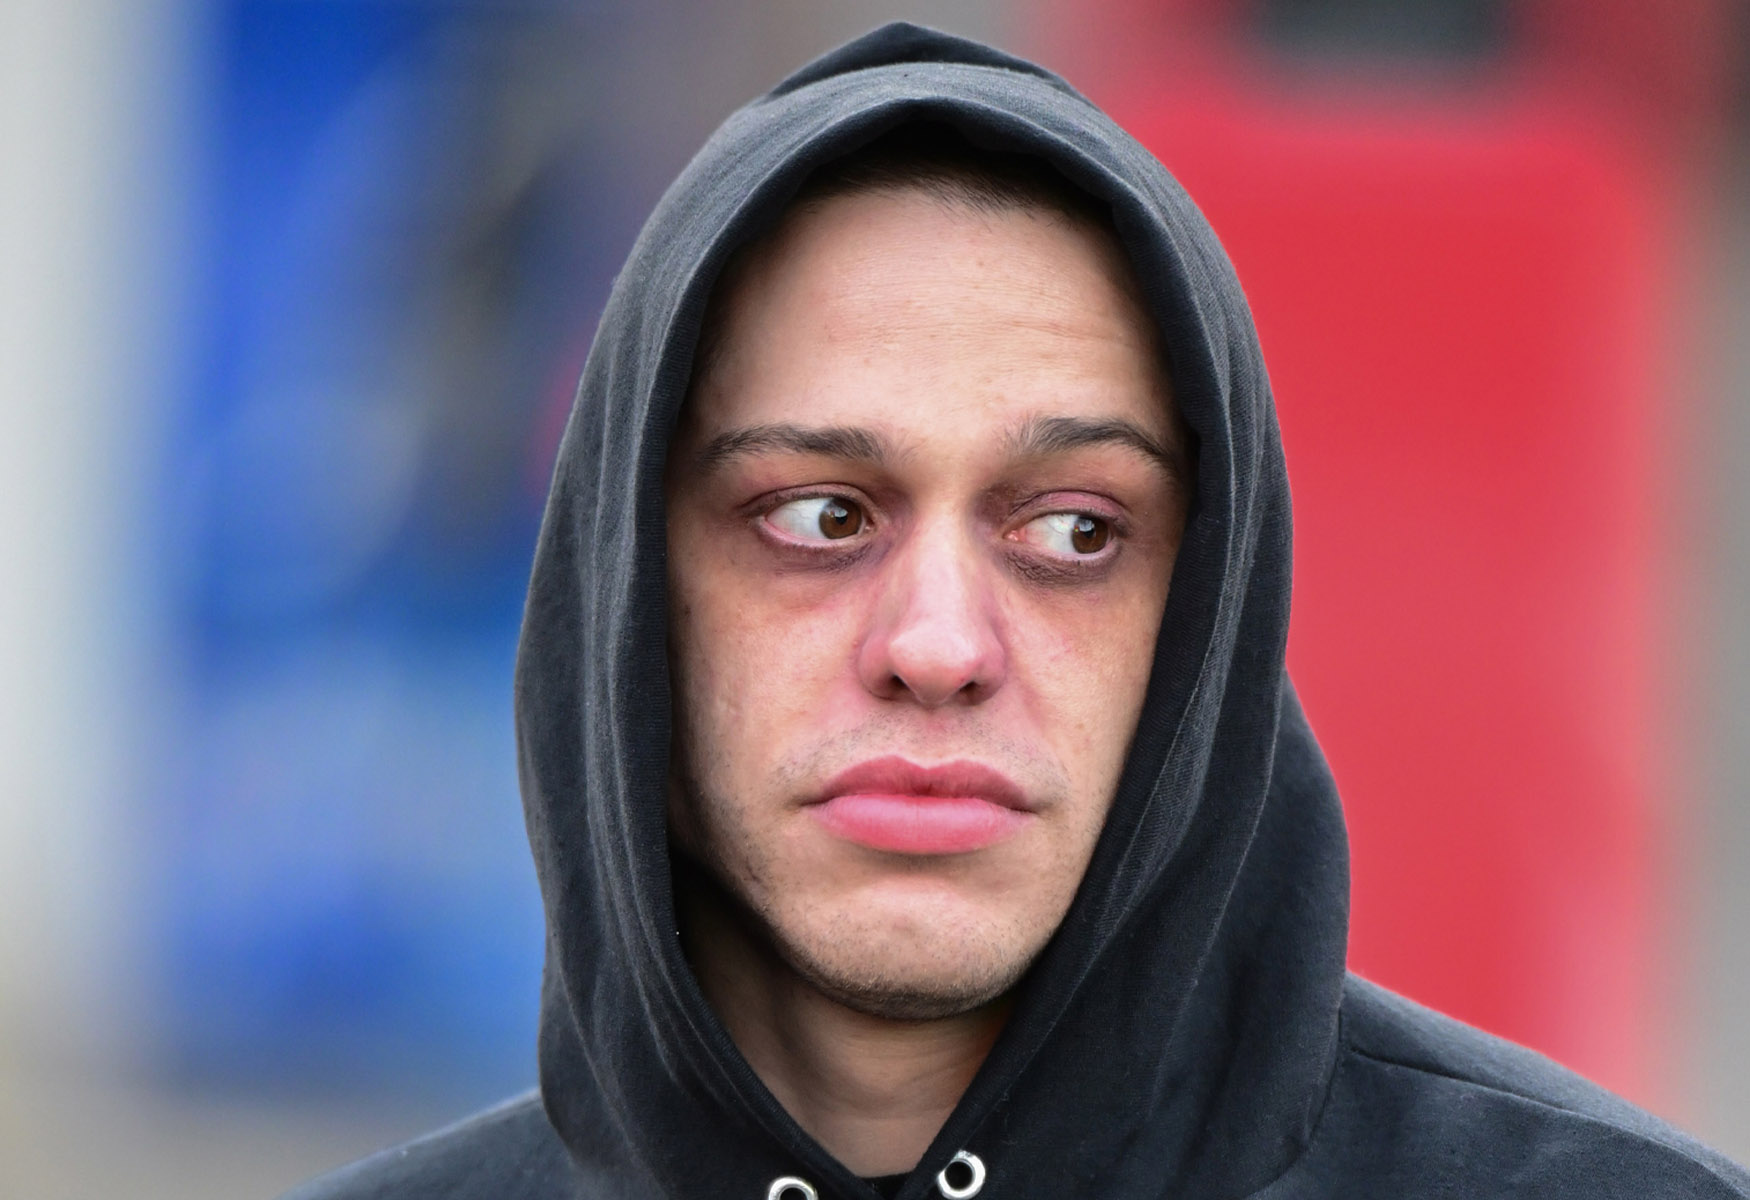 Pete Davidson Abruptly Cancels Multiple Comedy Shows, Leaving Fans Disappointed